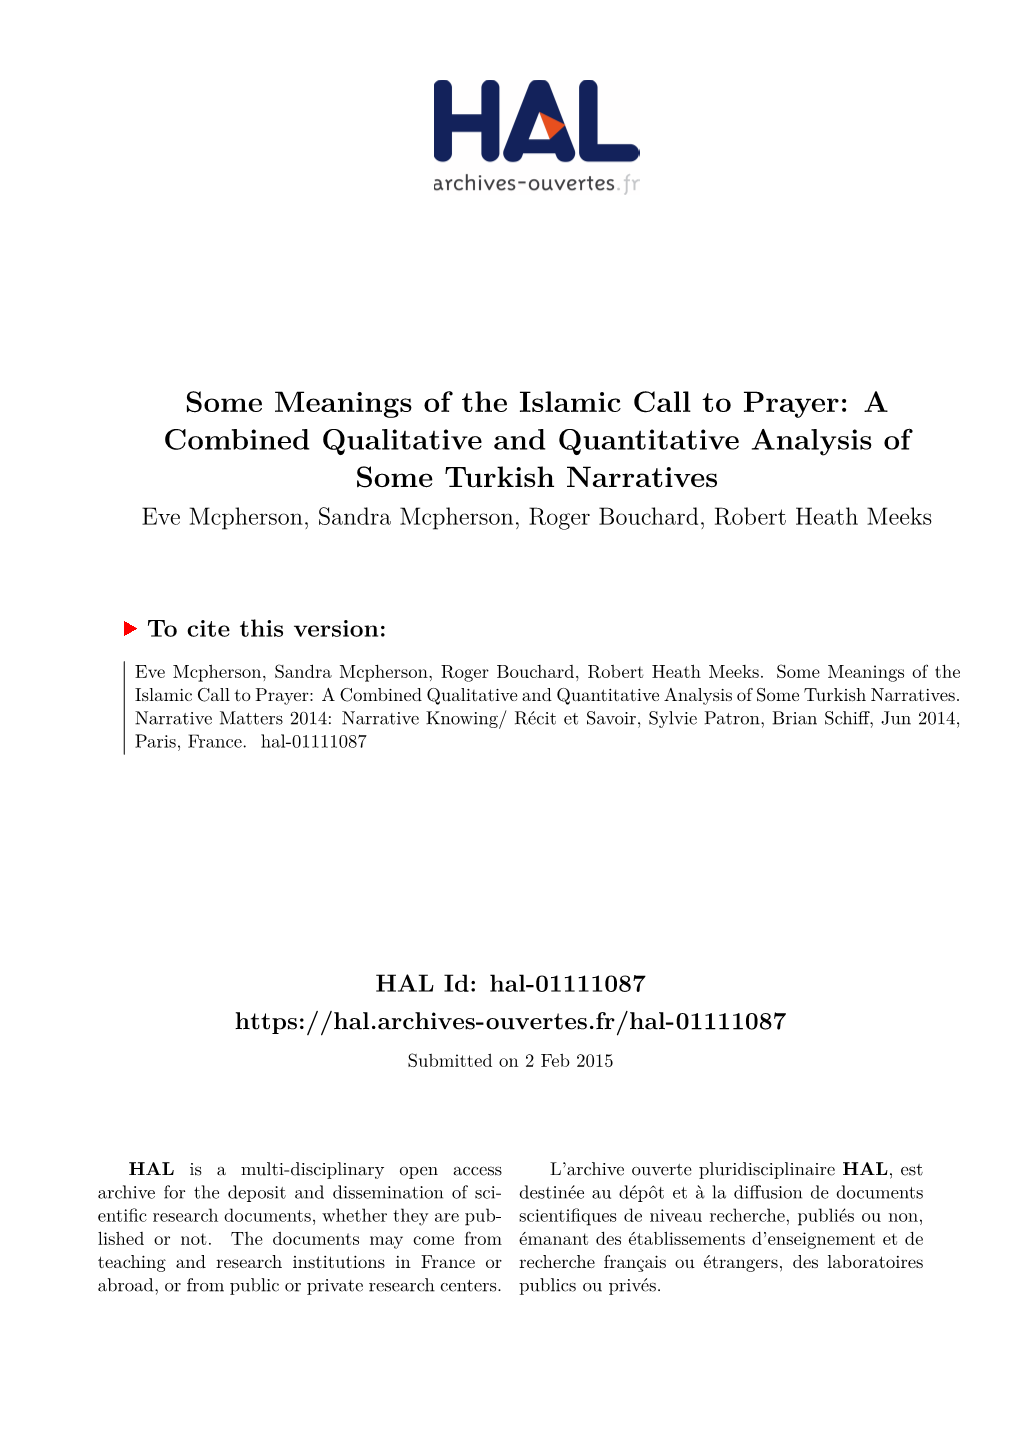 Some Meanings of the Islamic Call to Prayer